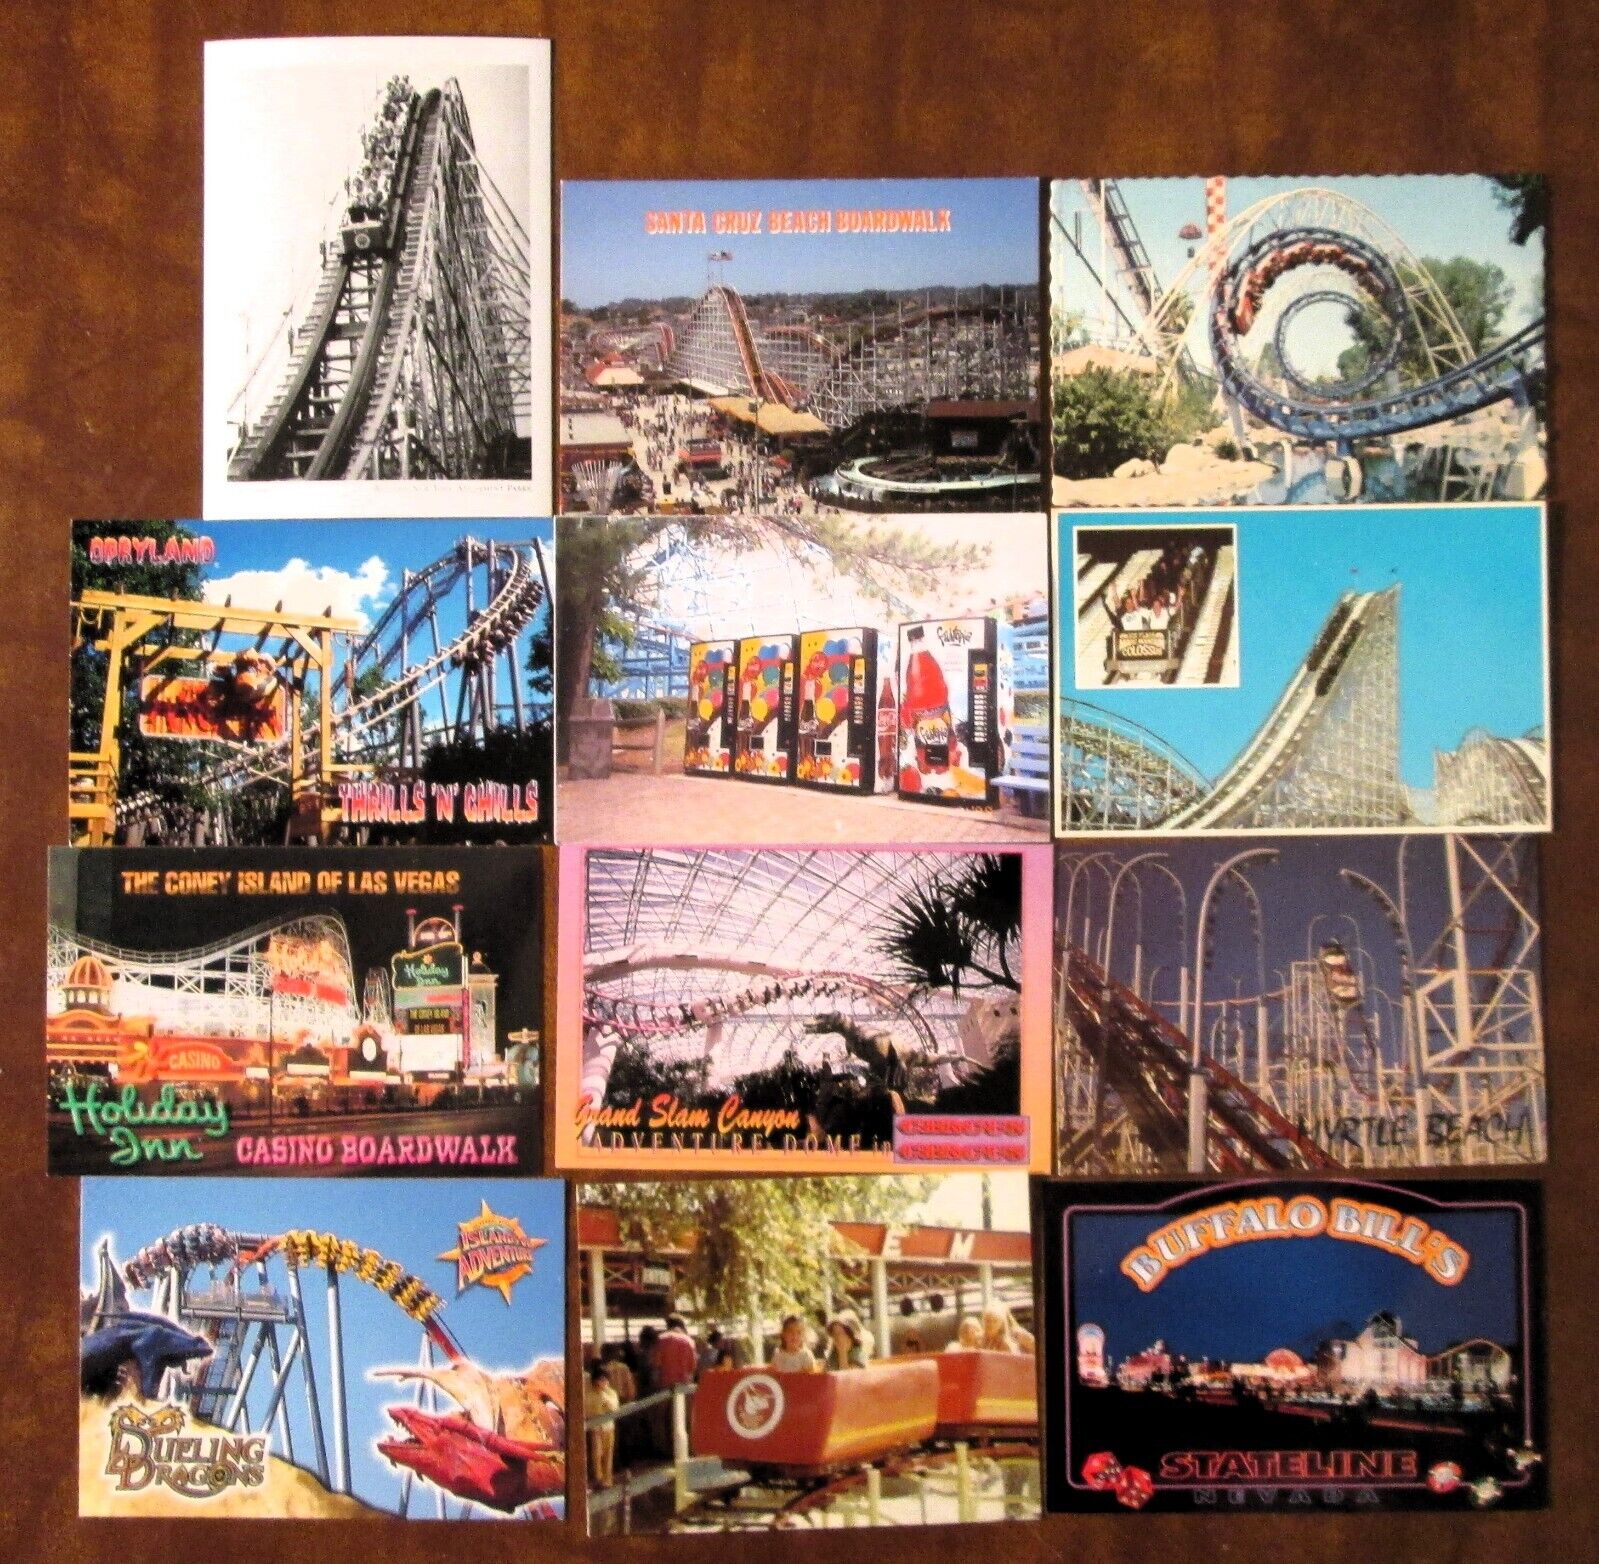 LOT of 12 ROLLER COASTER / AMUSEMENT PARK Postcards - NICE MIX of ROLLERCOASTERs